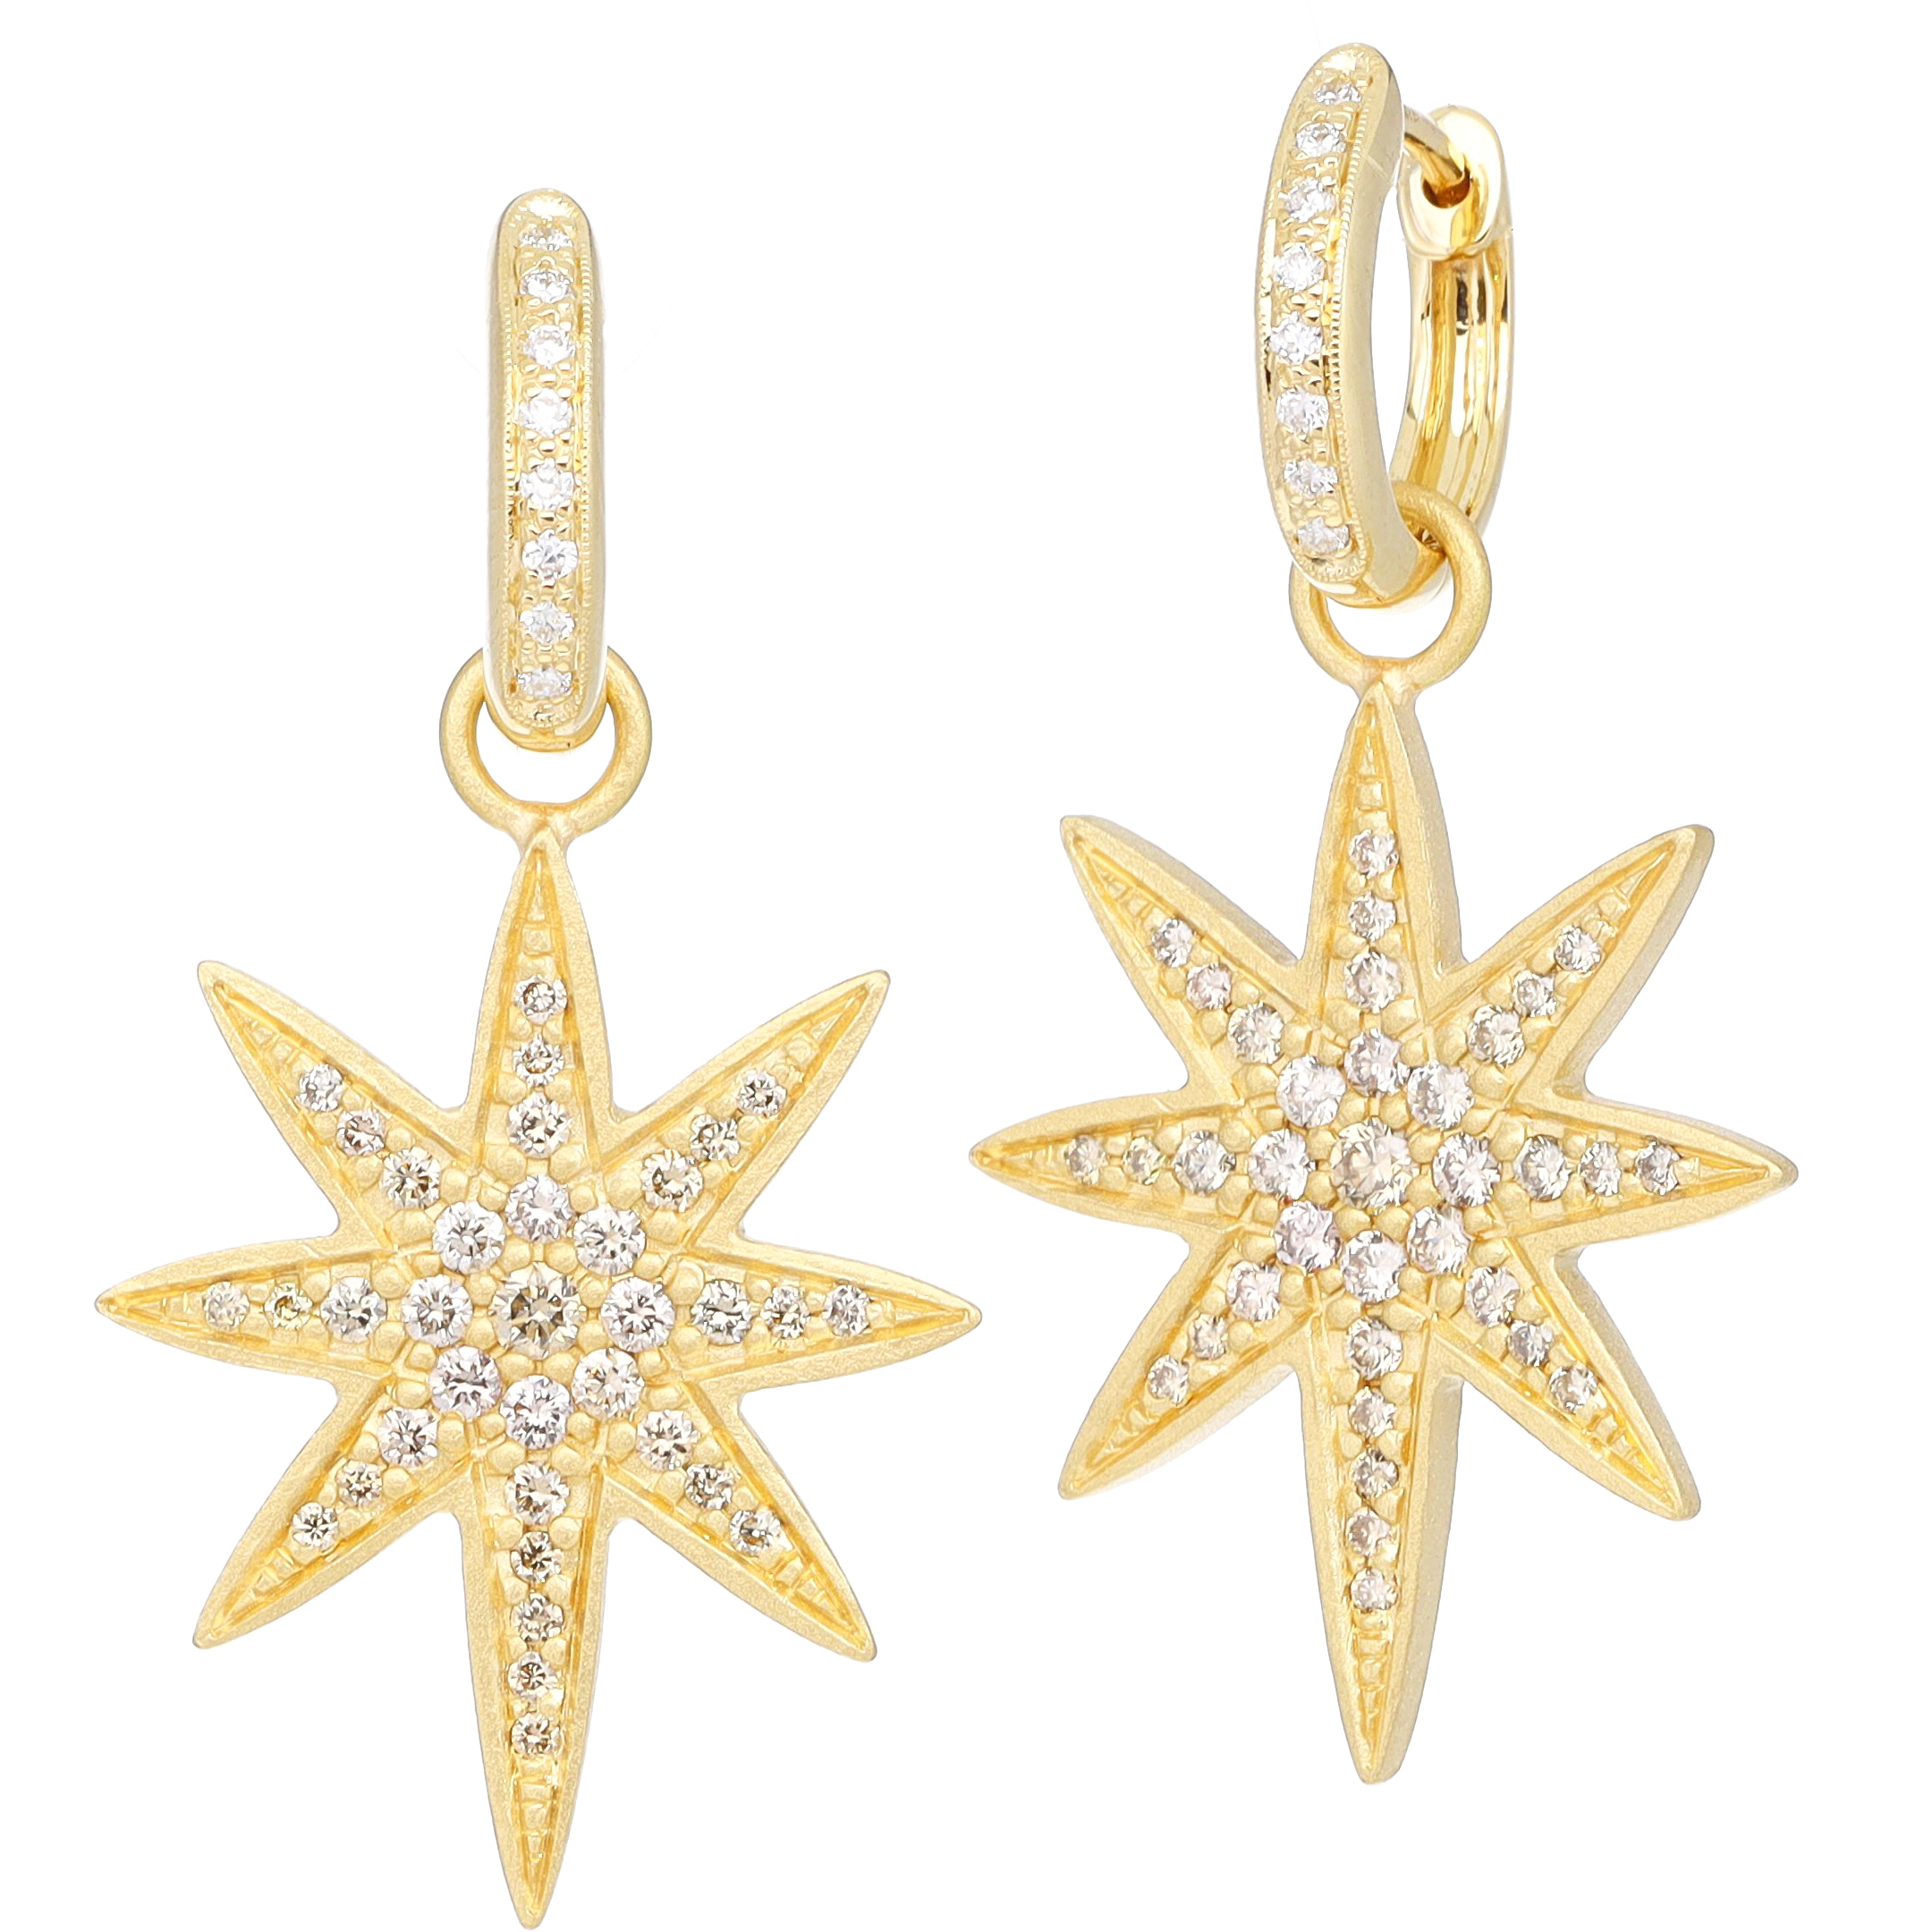 North Star Earring Charms